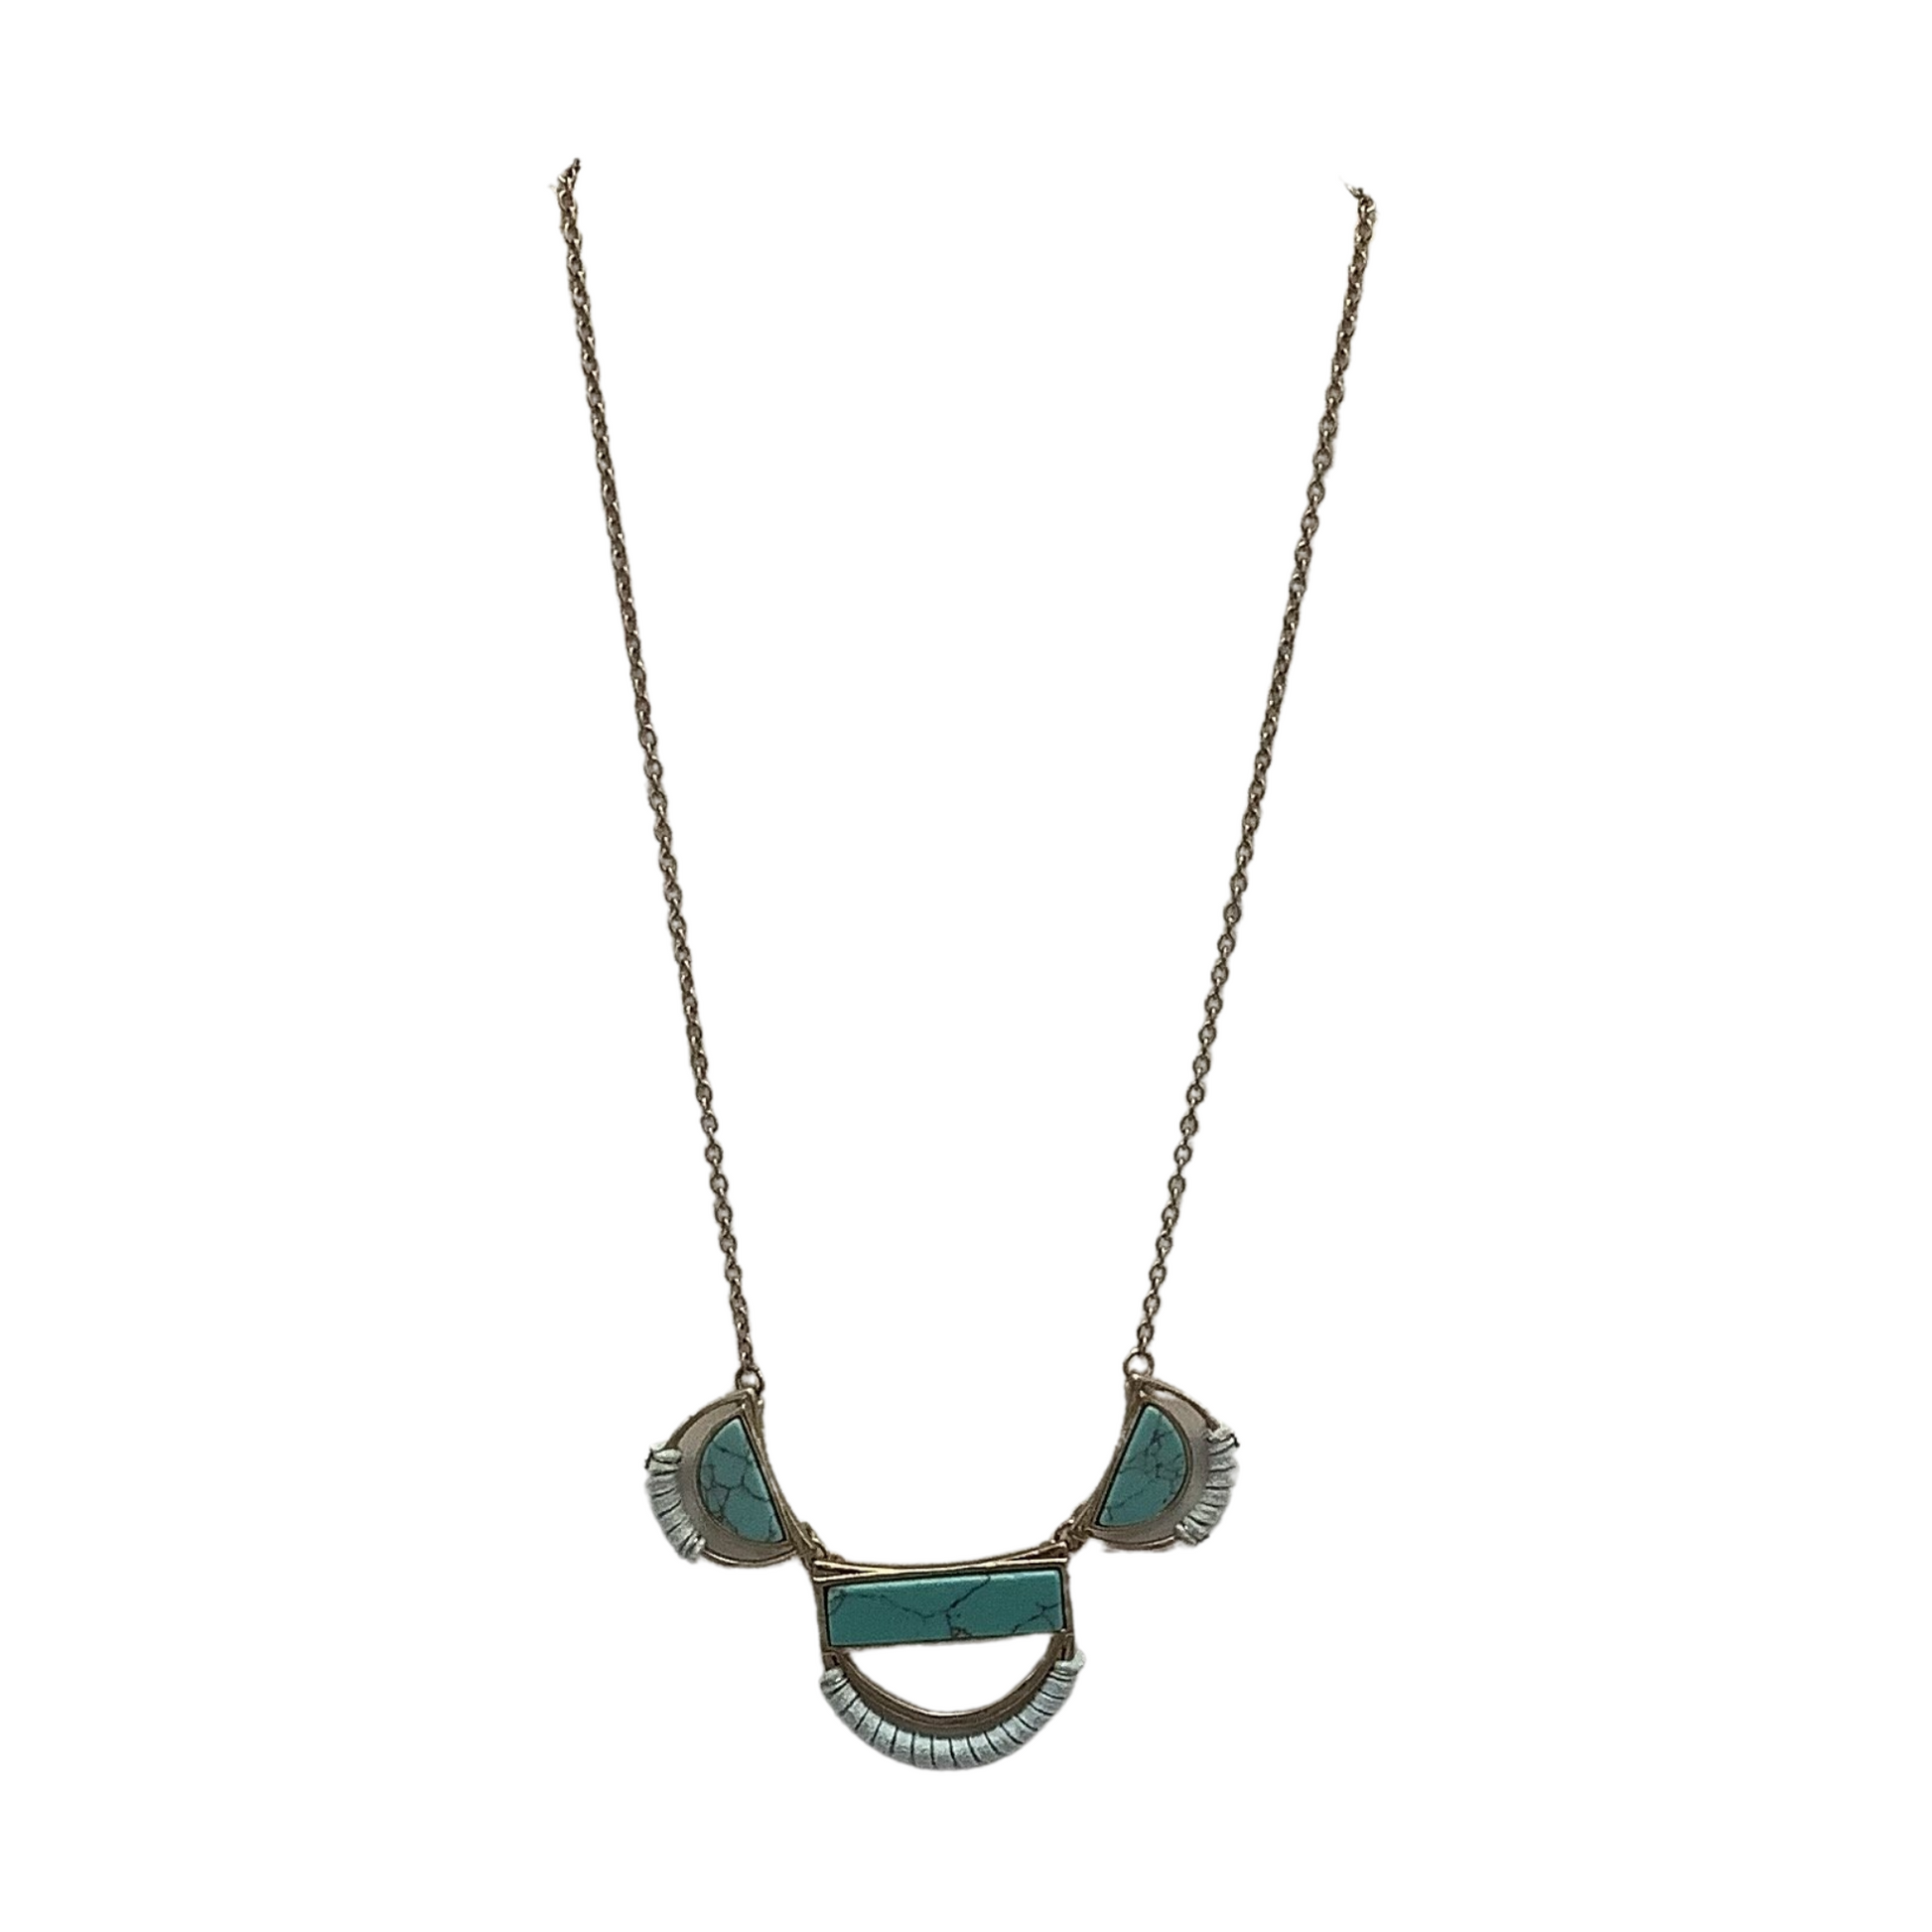 Tri-stone necklace in turquoise